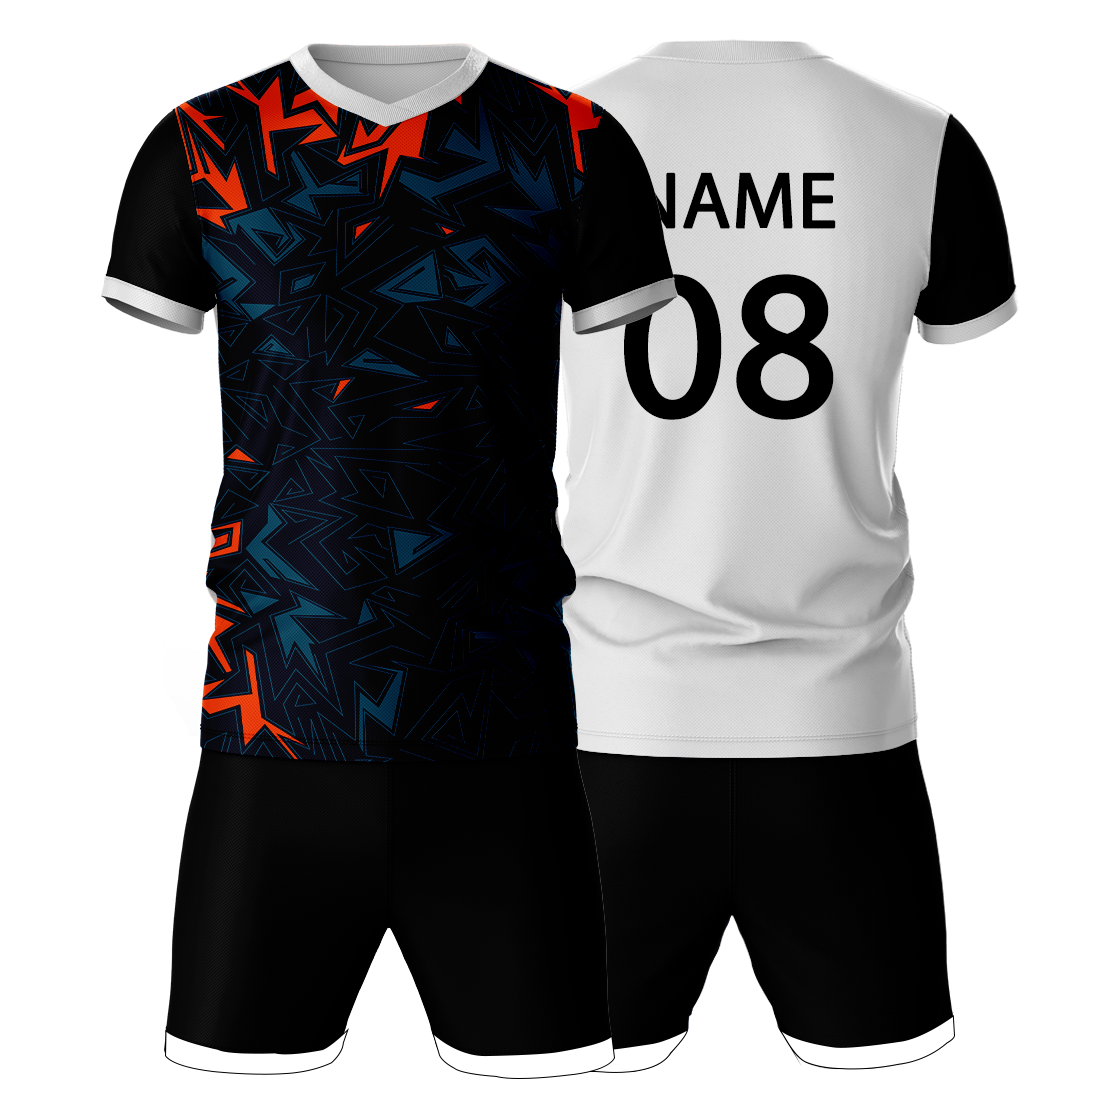 All Over Printed Jersey With Shorts Name & Number Printed.NP50000691